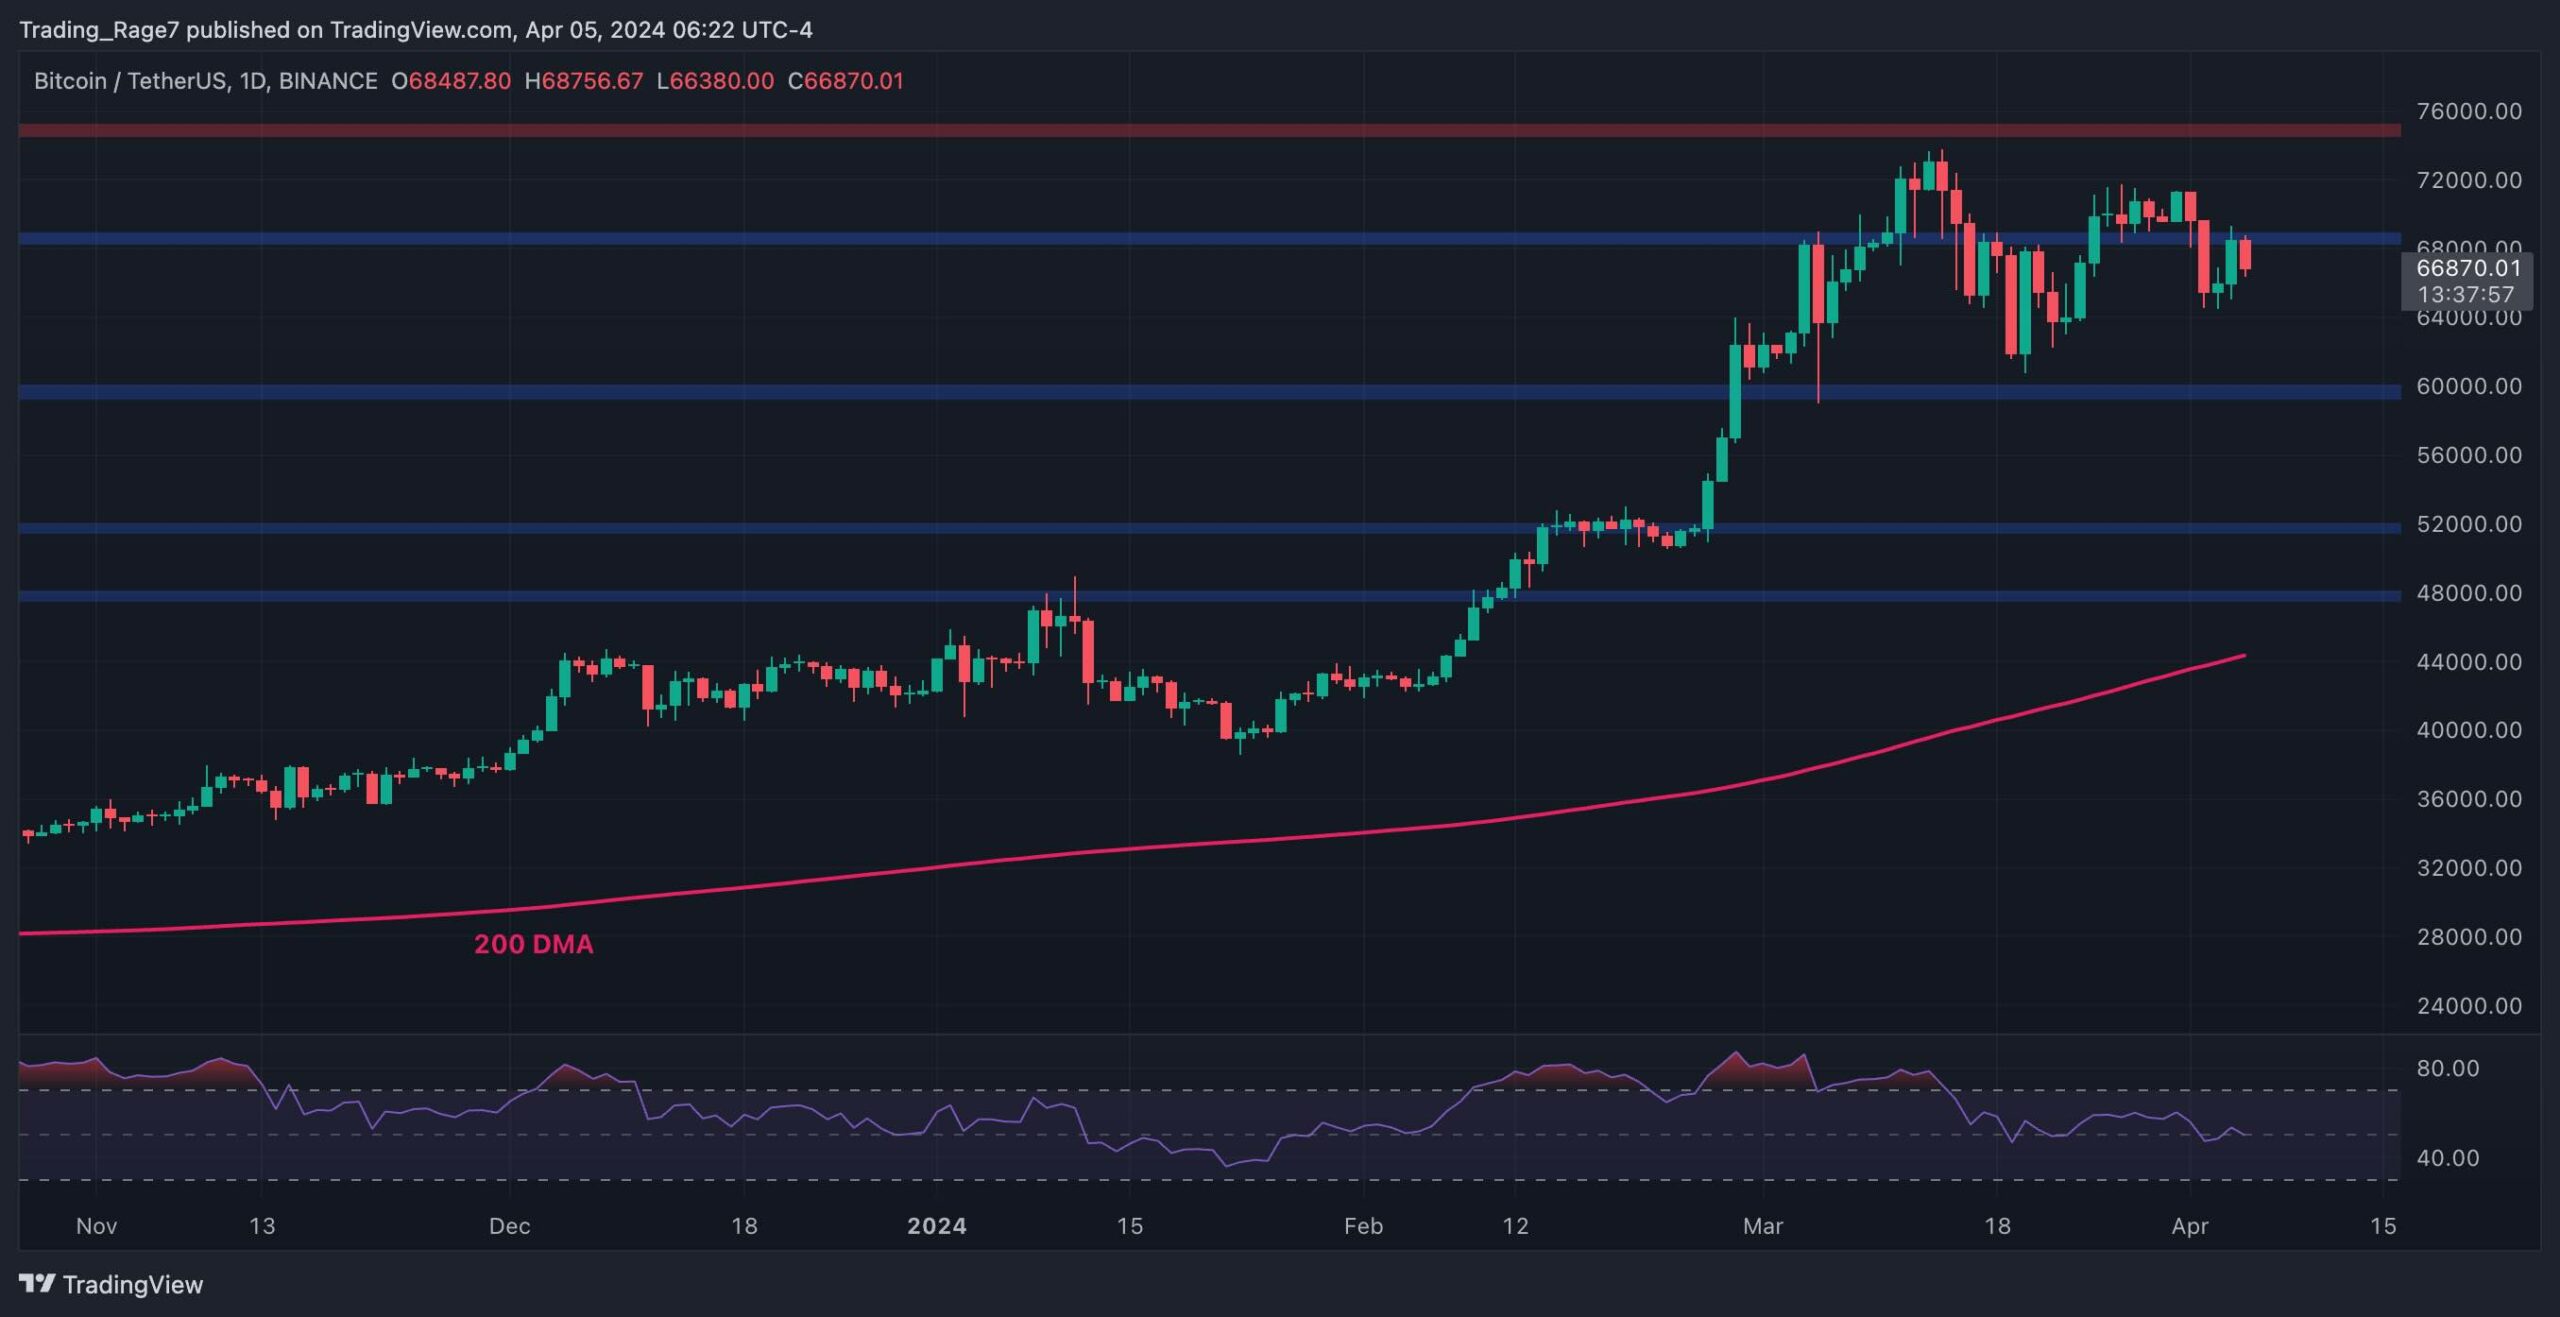 BTC Needs to Break This Level to Aim for a New All-Time High (Bitcoin Price Analysis)